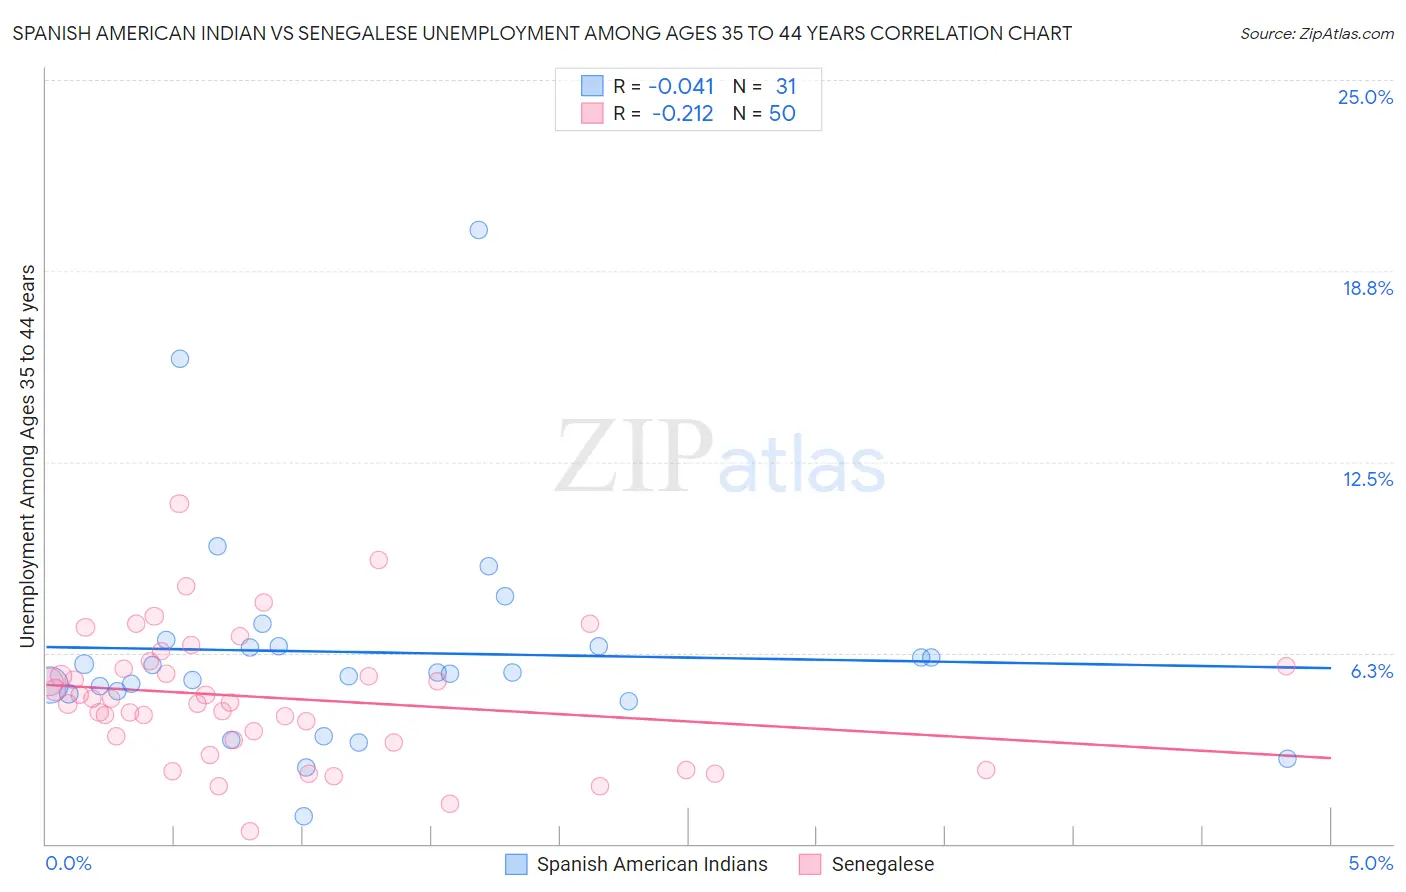 Spanish American Indian vs Senegalese Unemployment Among Ages 35 to 44 years